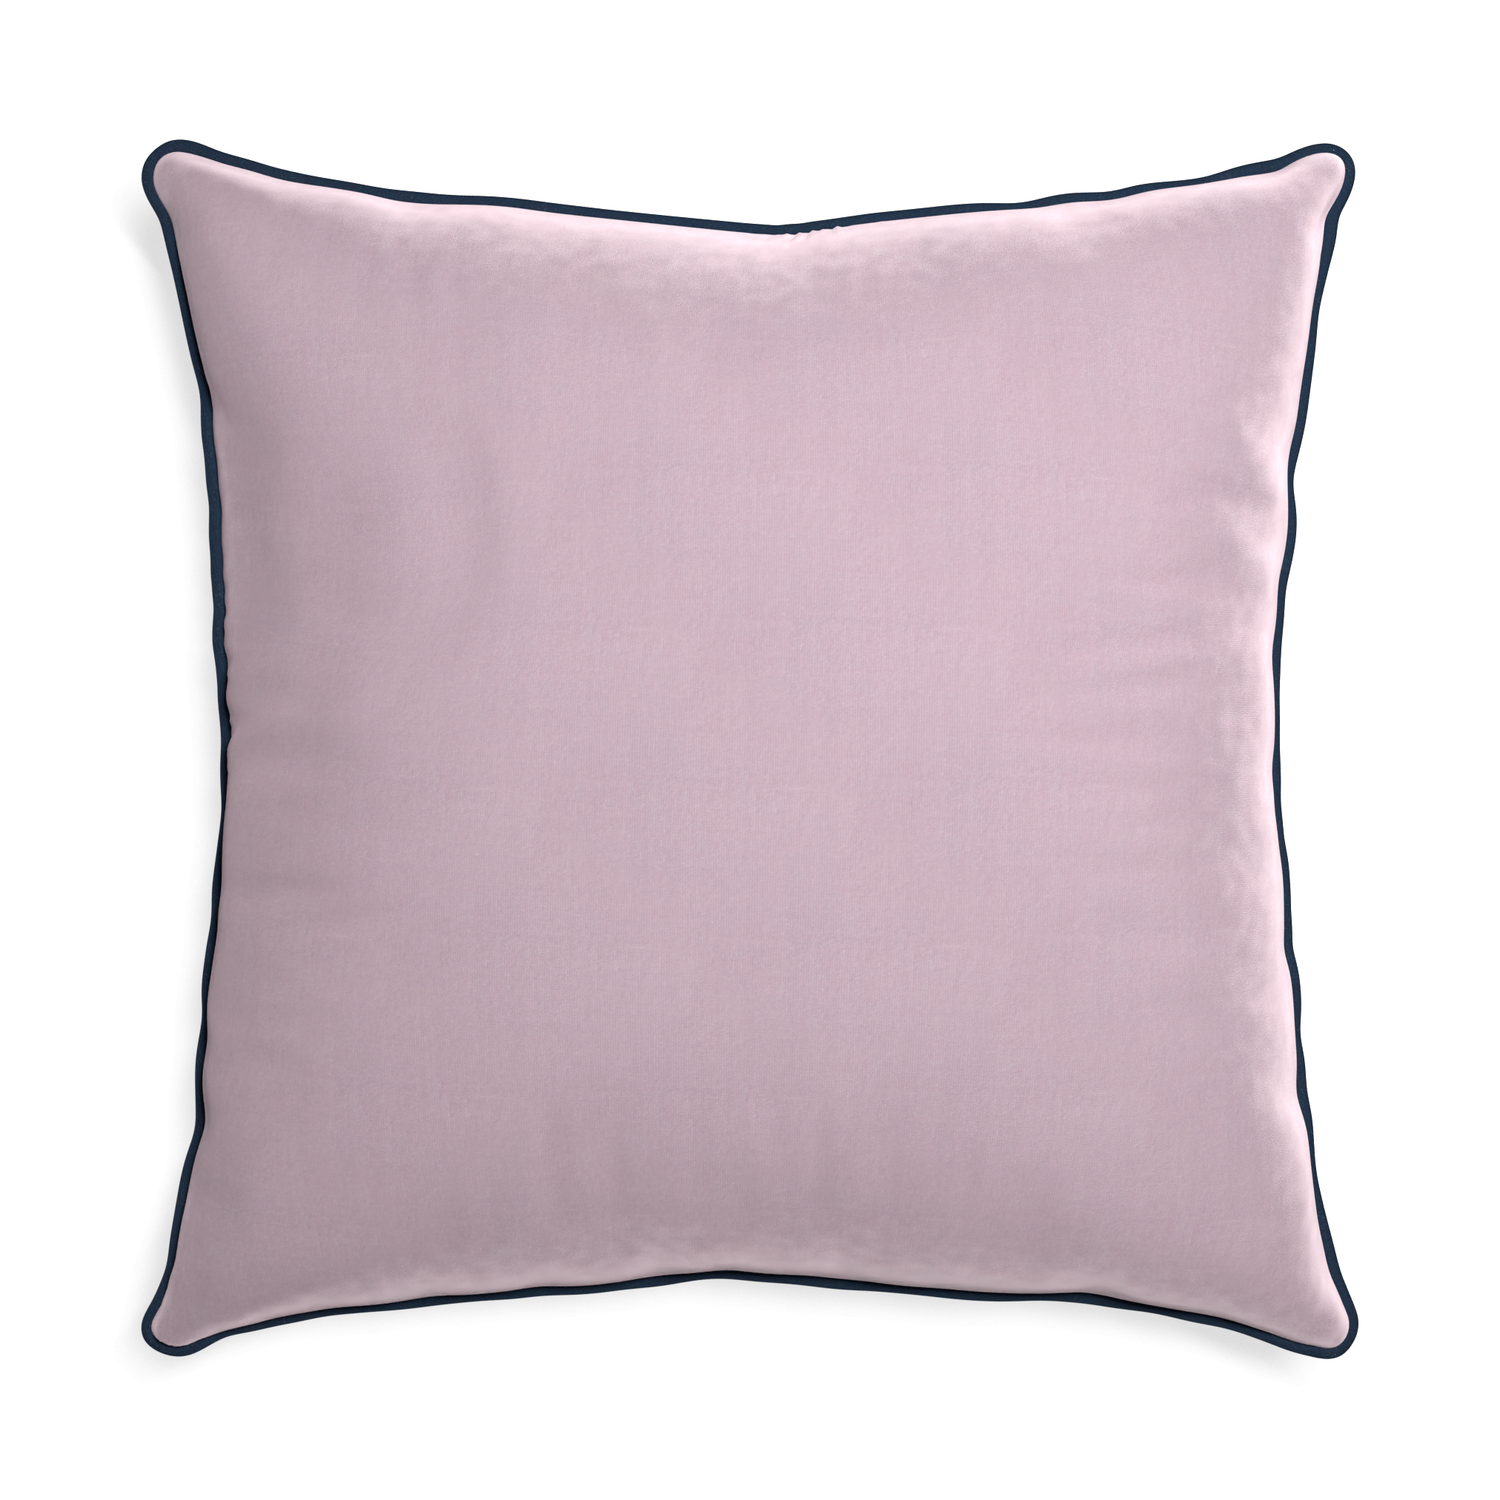 Euro-sham lilac velvet custom lilacpillow with c piping on white background